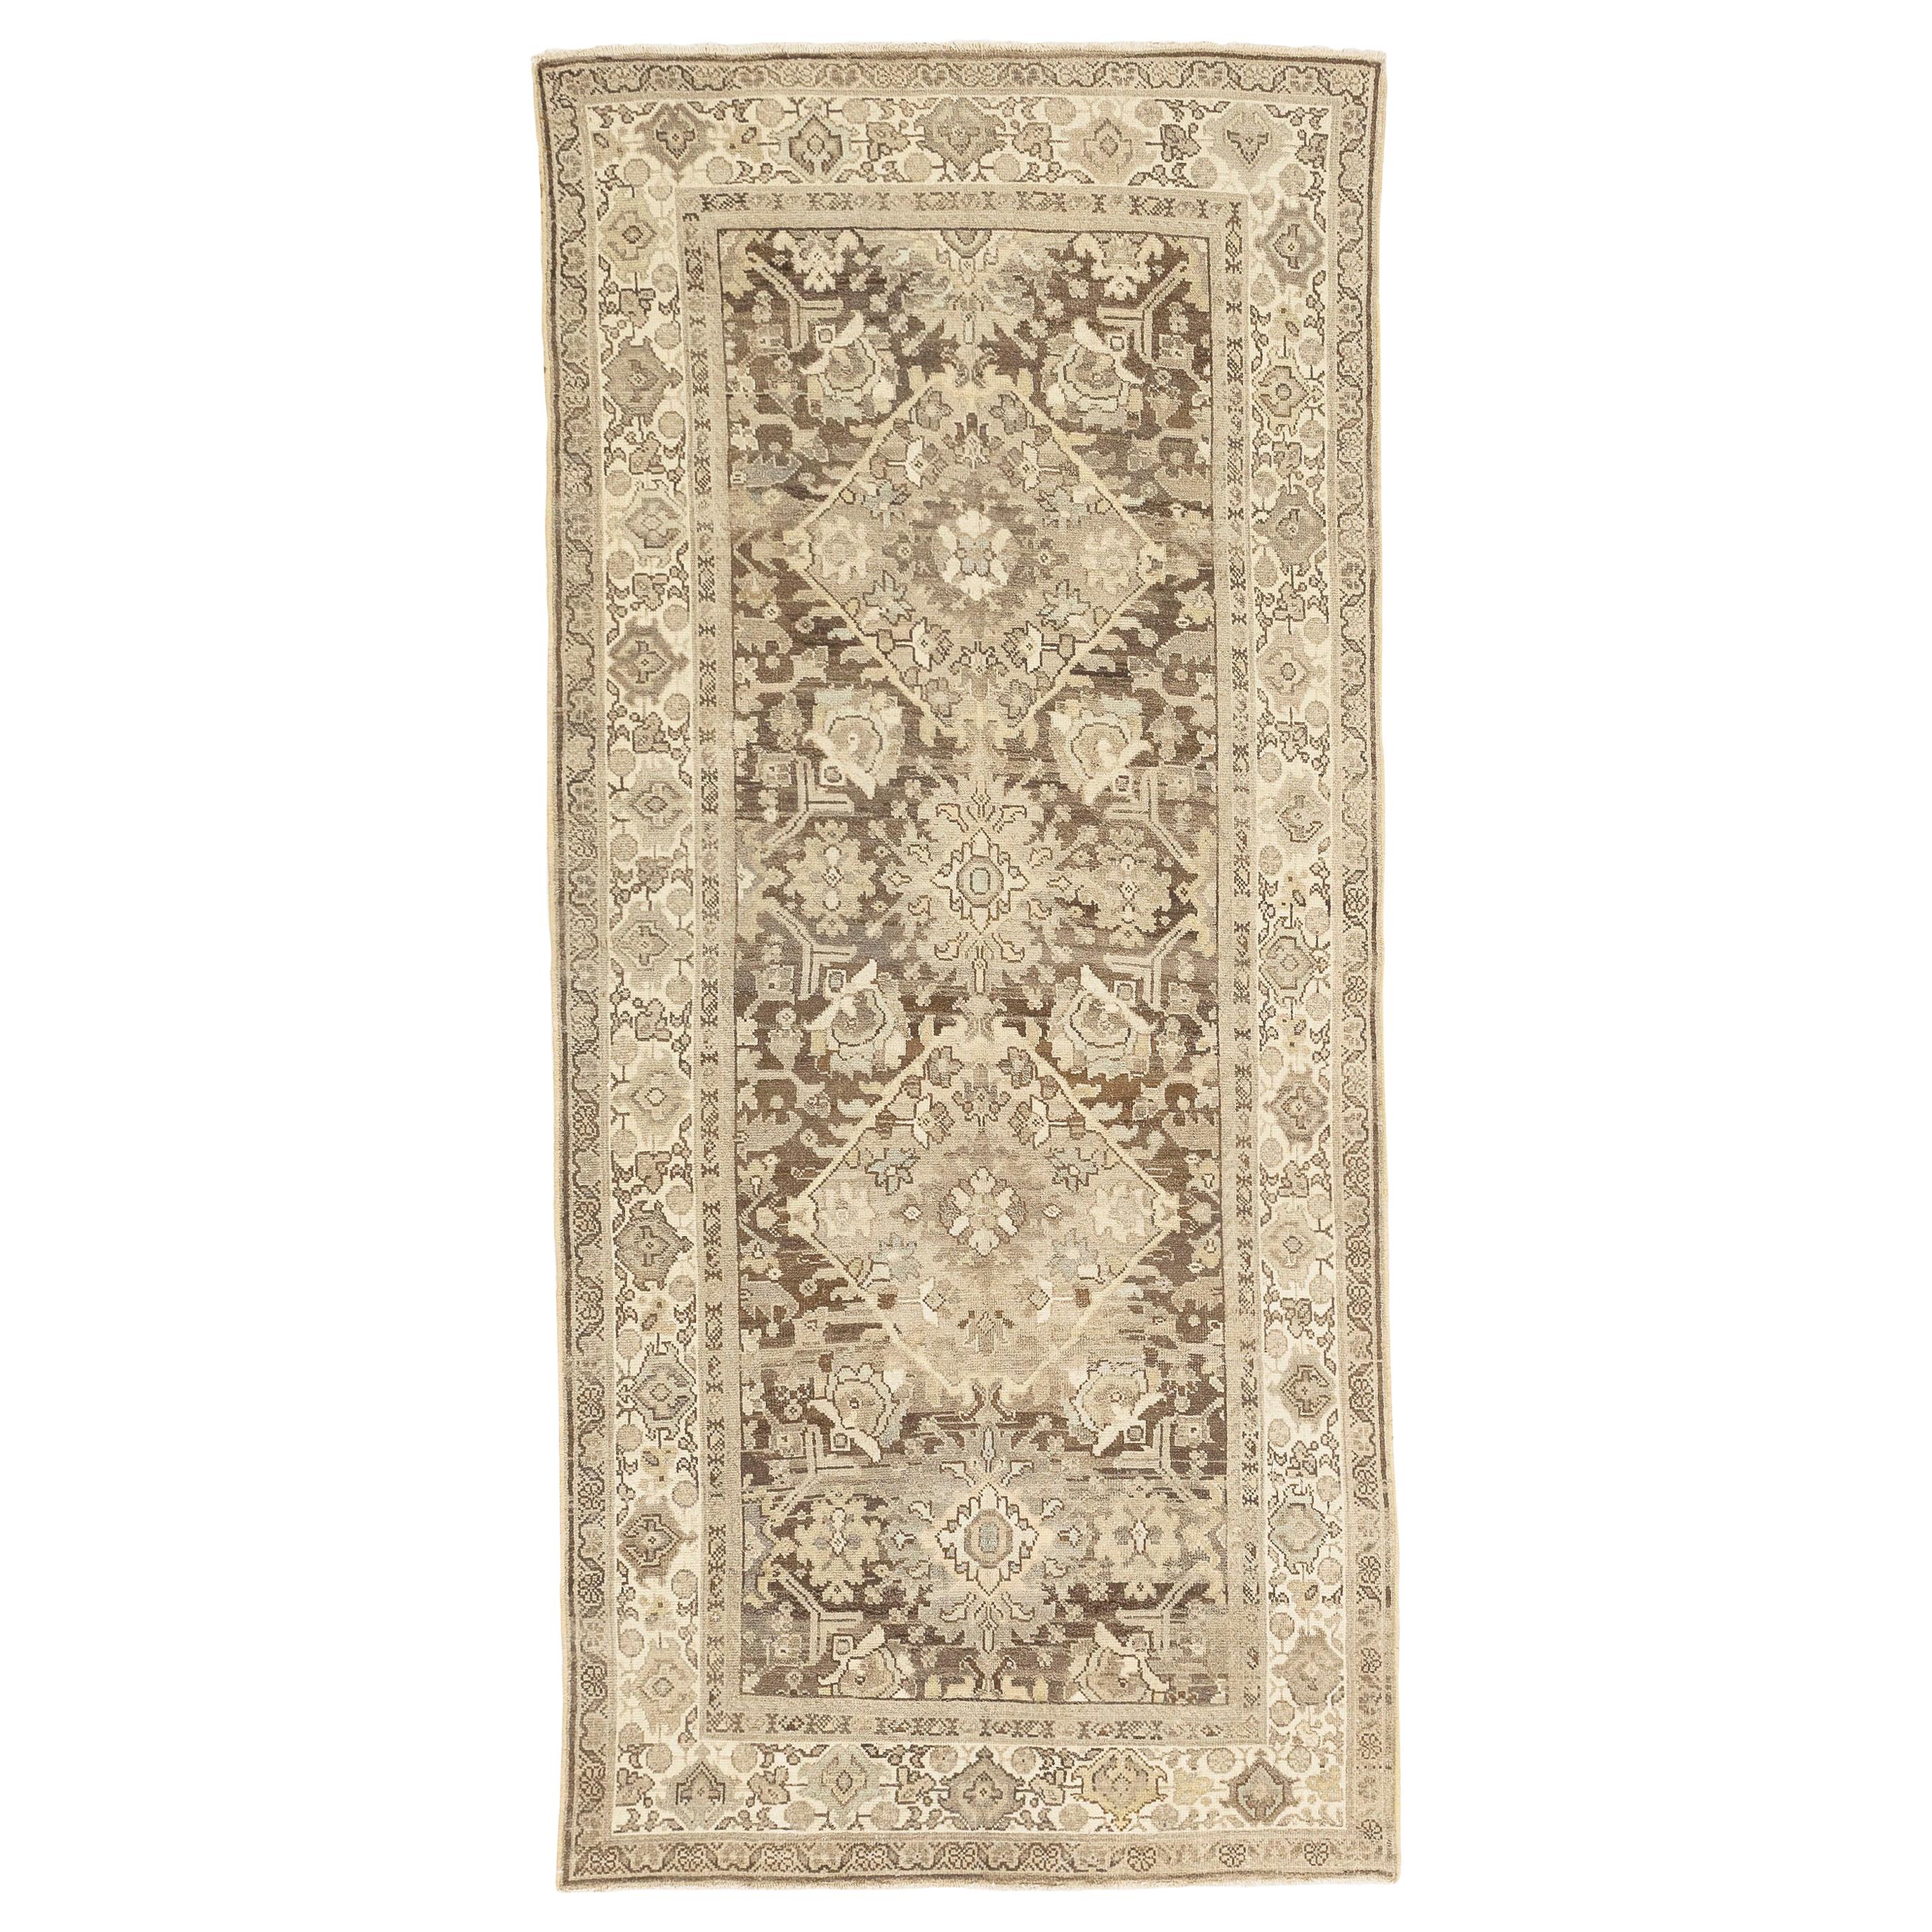 Antique Persian Mahal Rug with Ivory and Brown Botanical Patterns For Sale